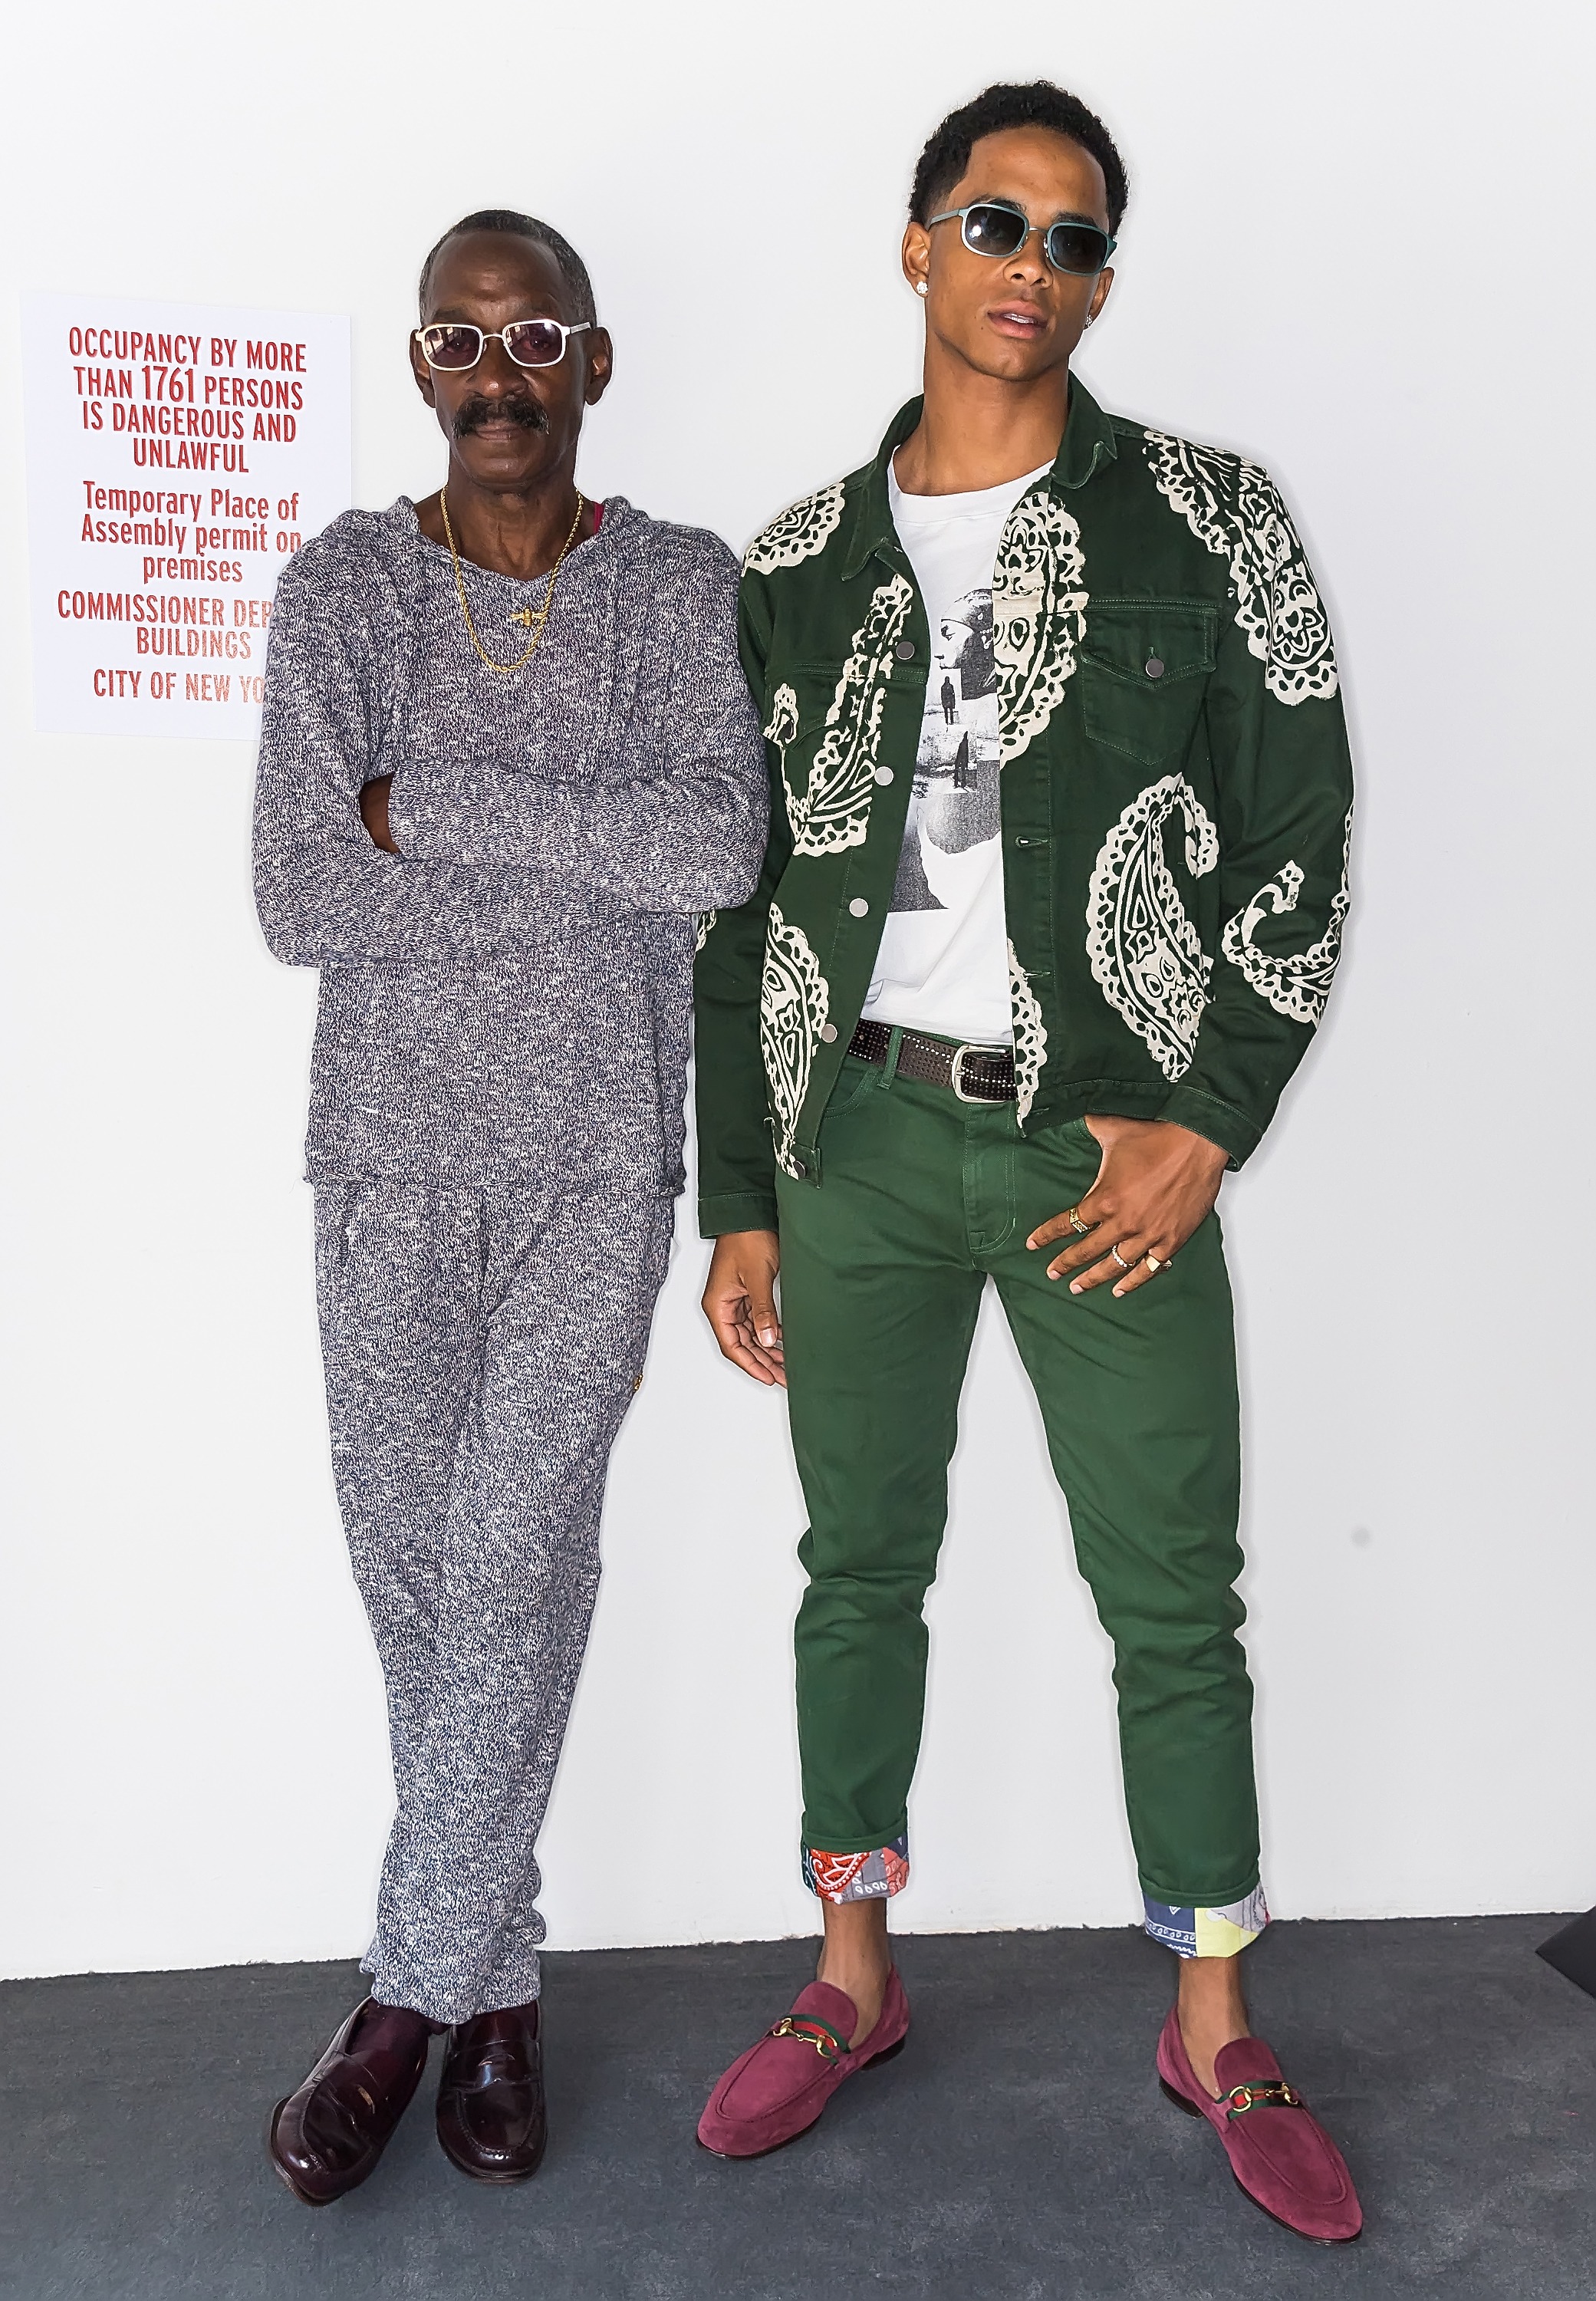 Cordell Broadus, Snoop Dogg’s son, Lands First Major Model Campaign ...